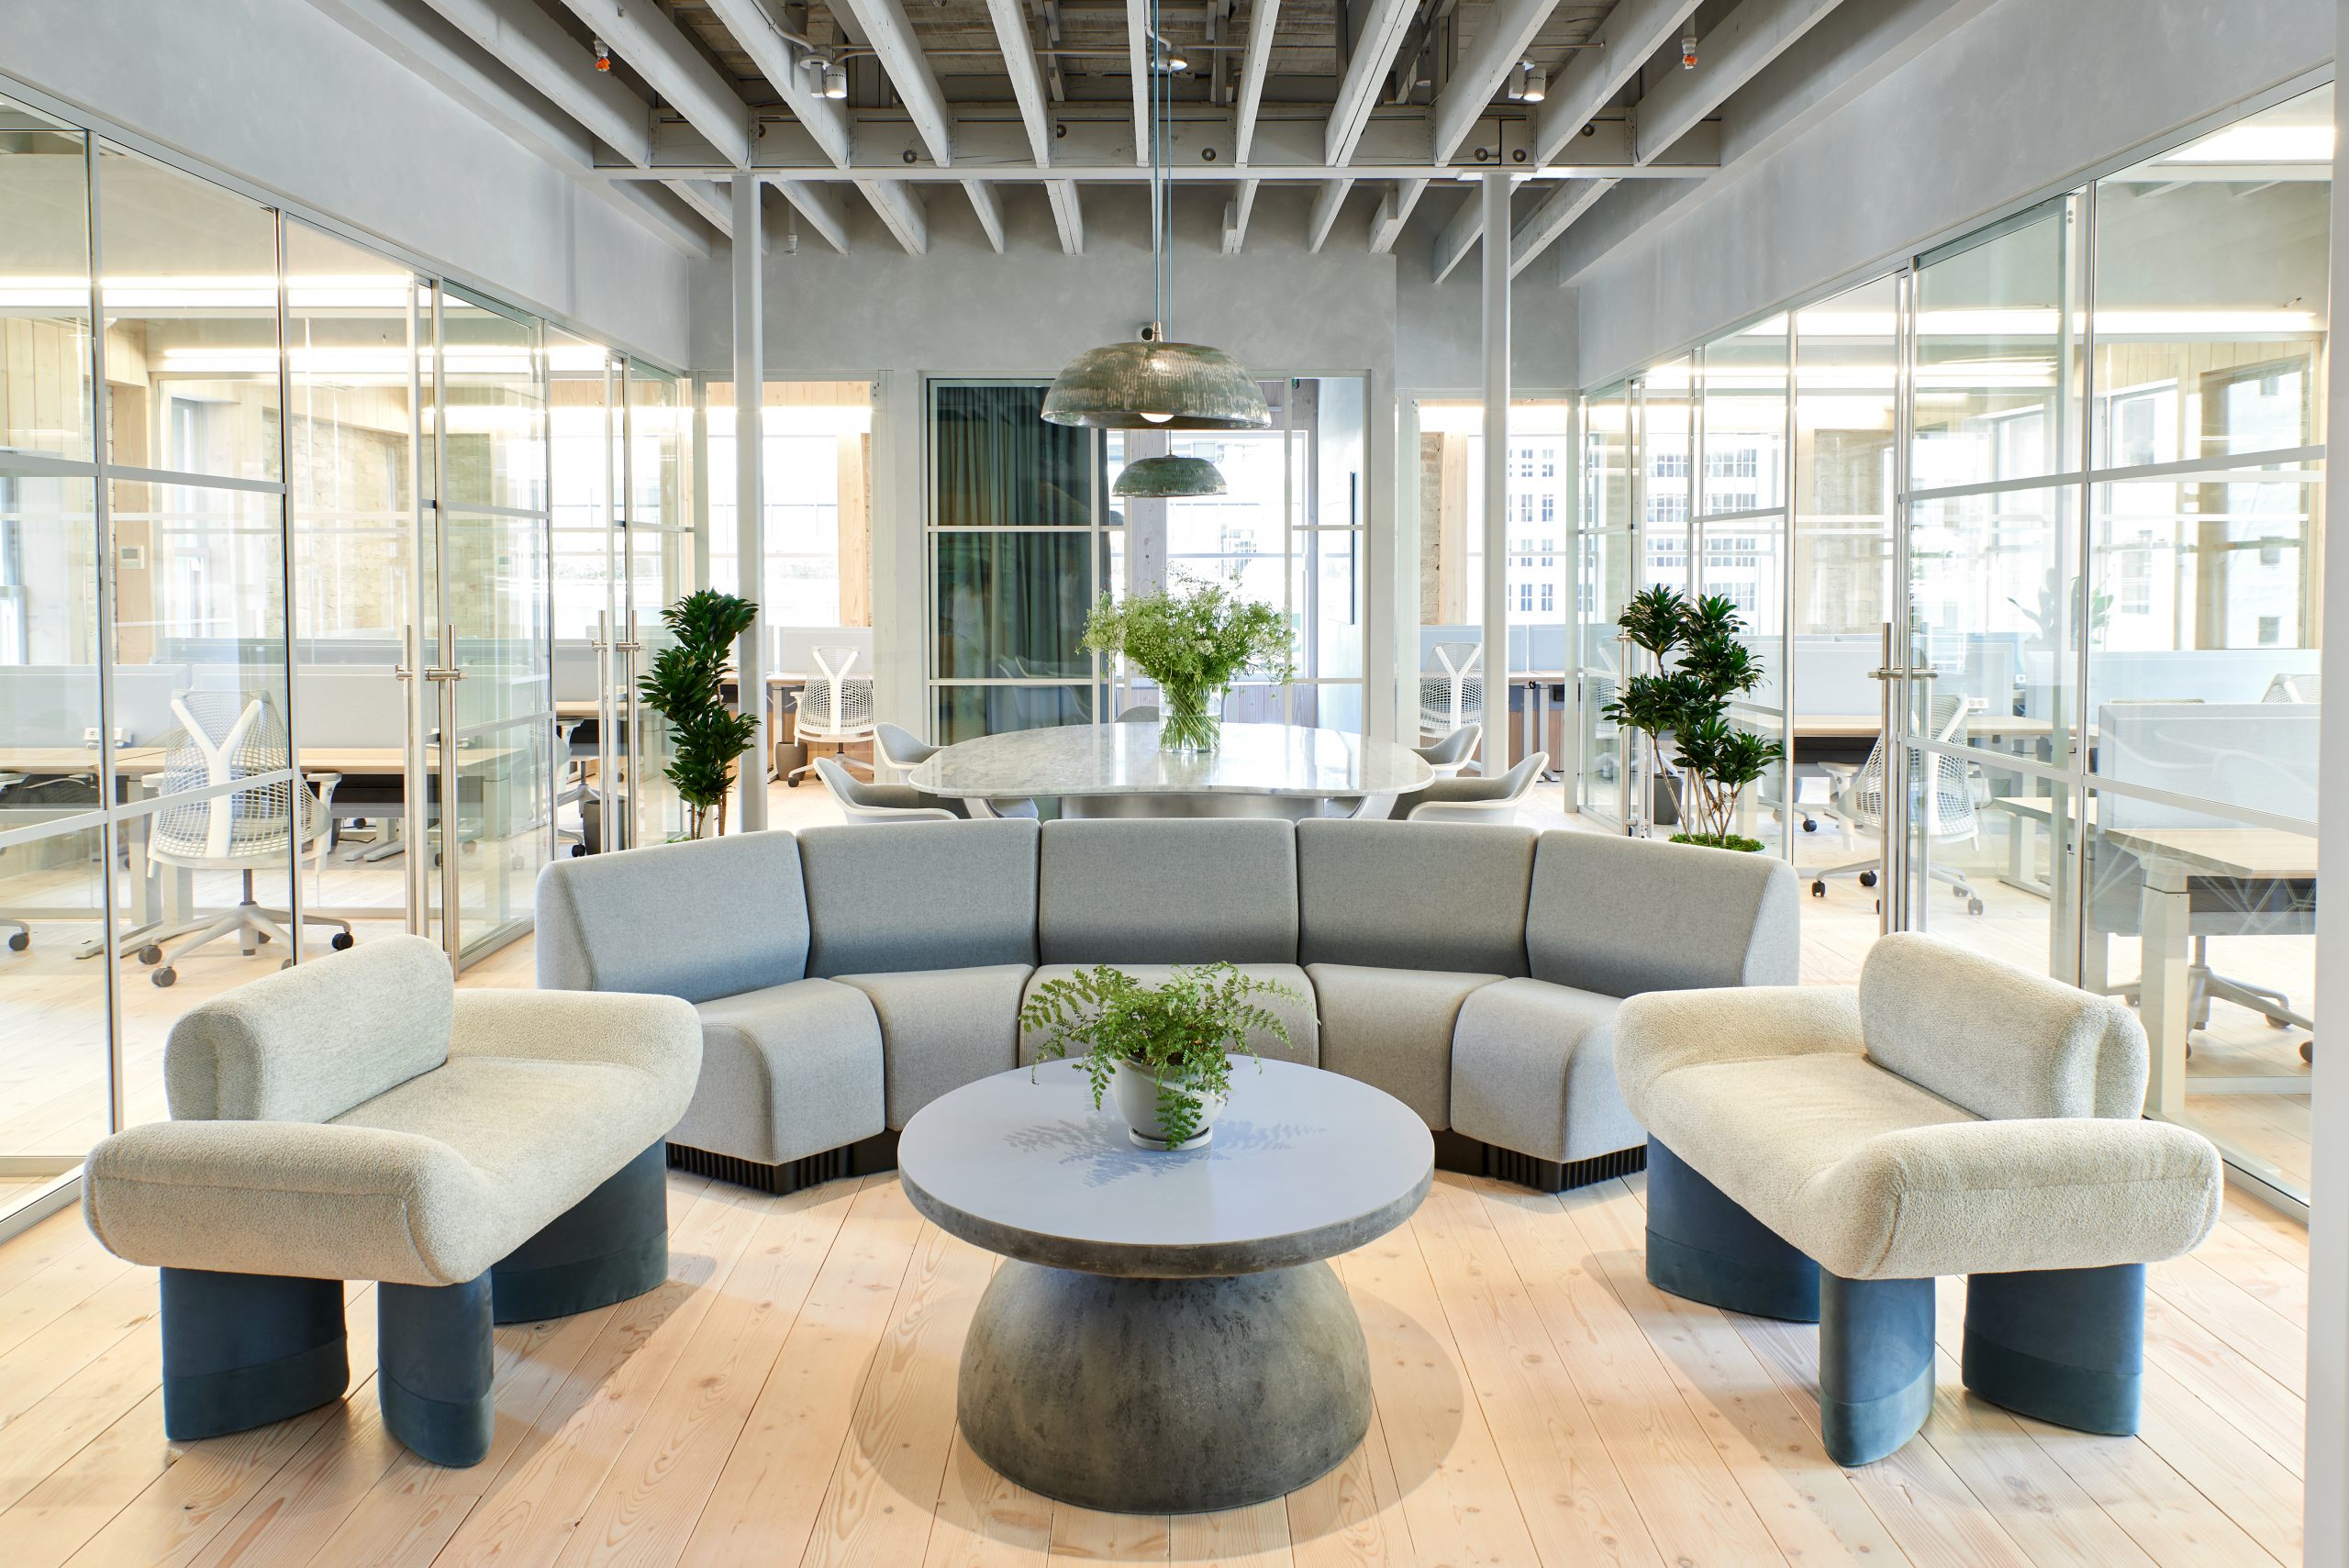 Communal spaces feature plush neutral-hued seating bathed in natural light. (Ben Kist)